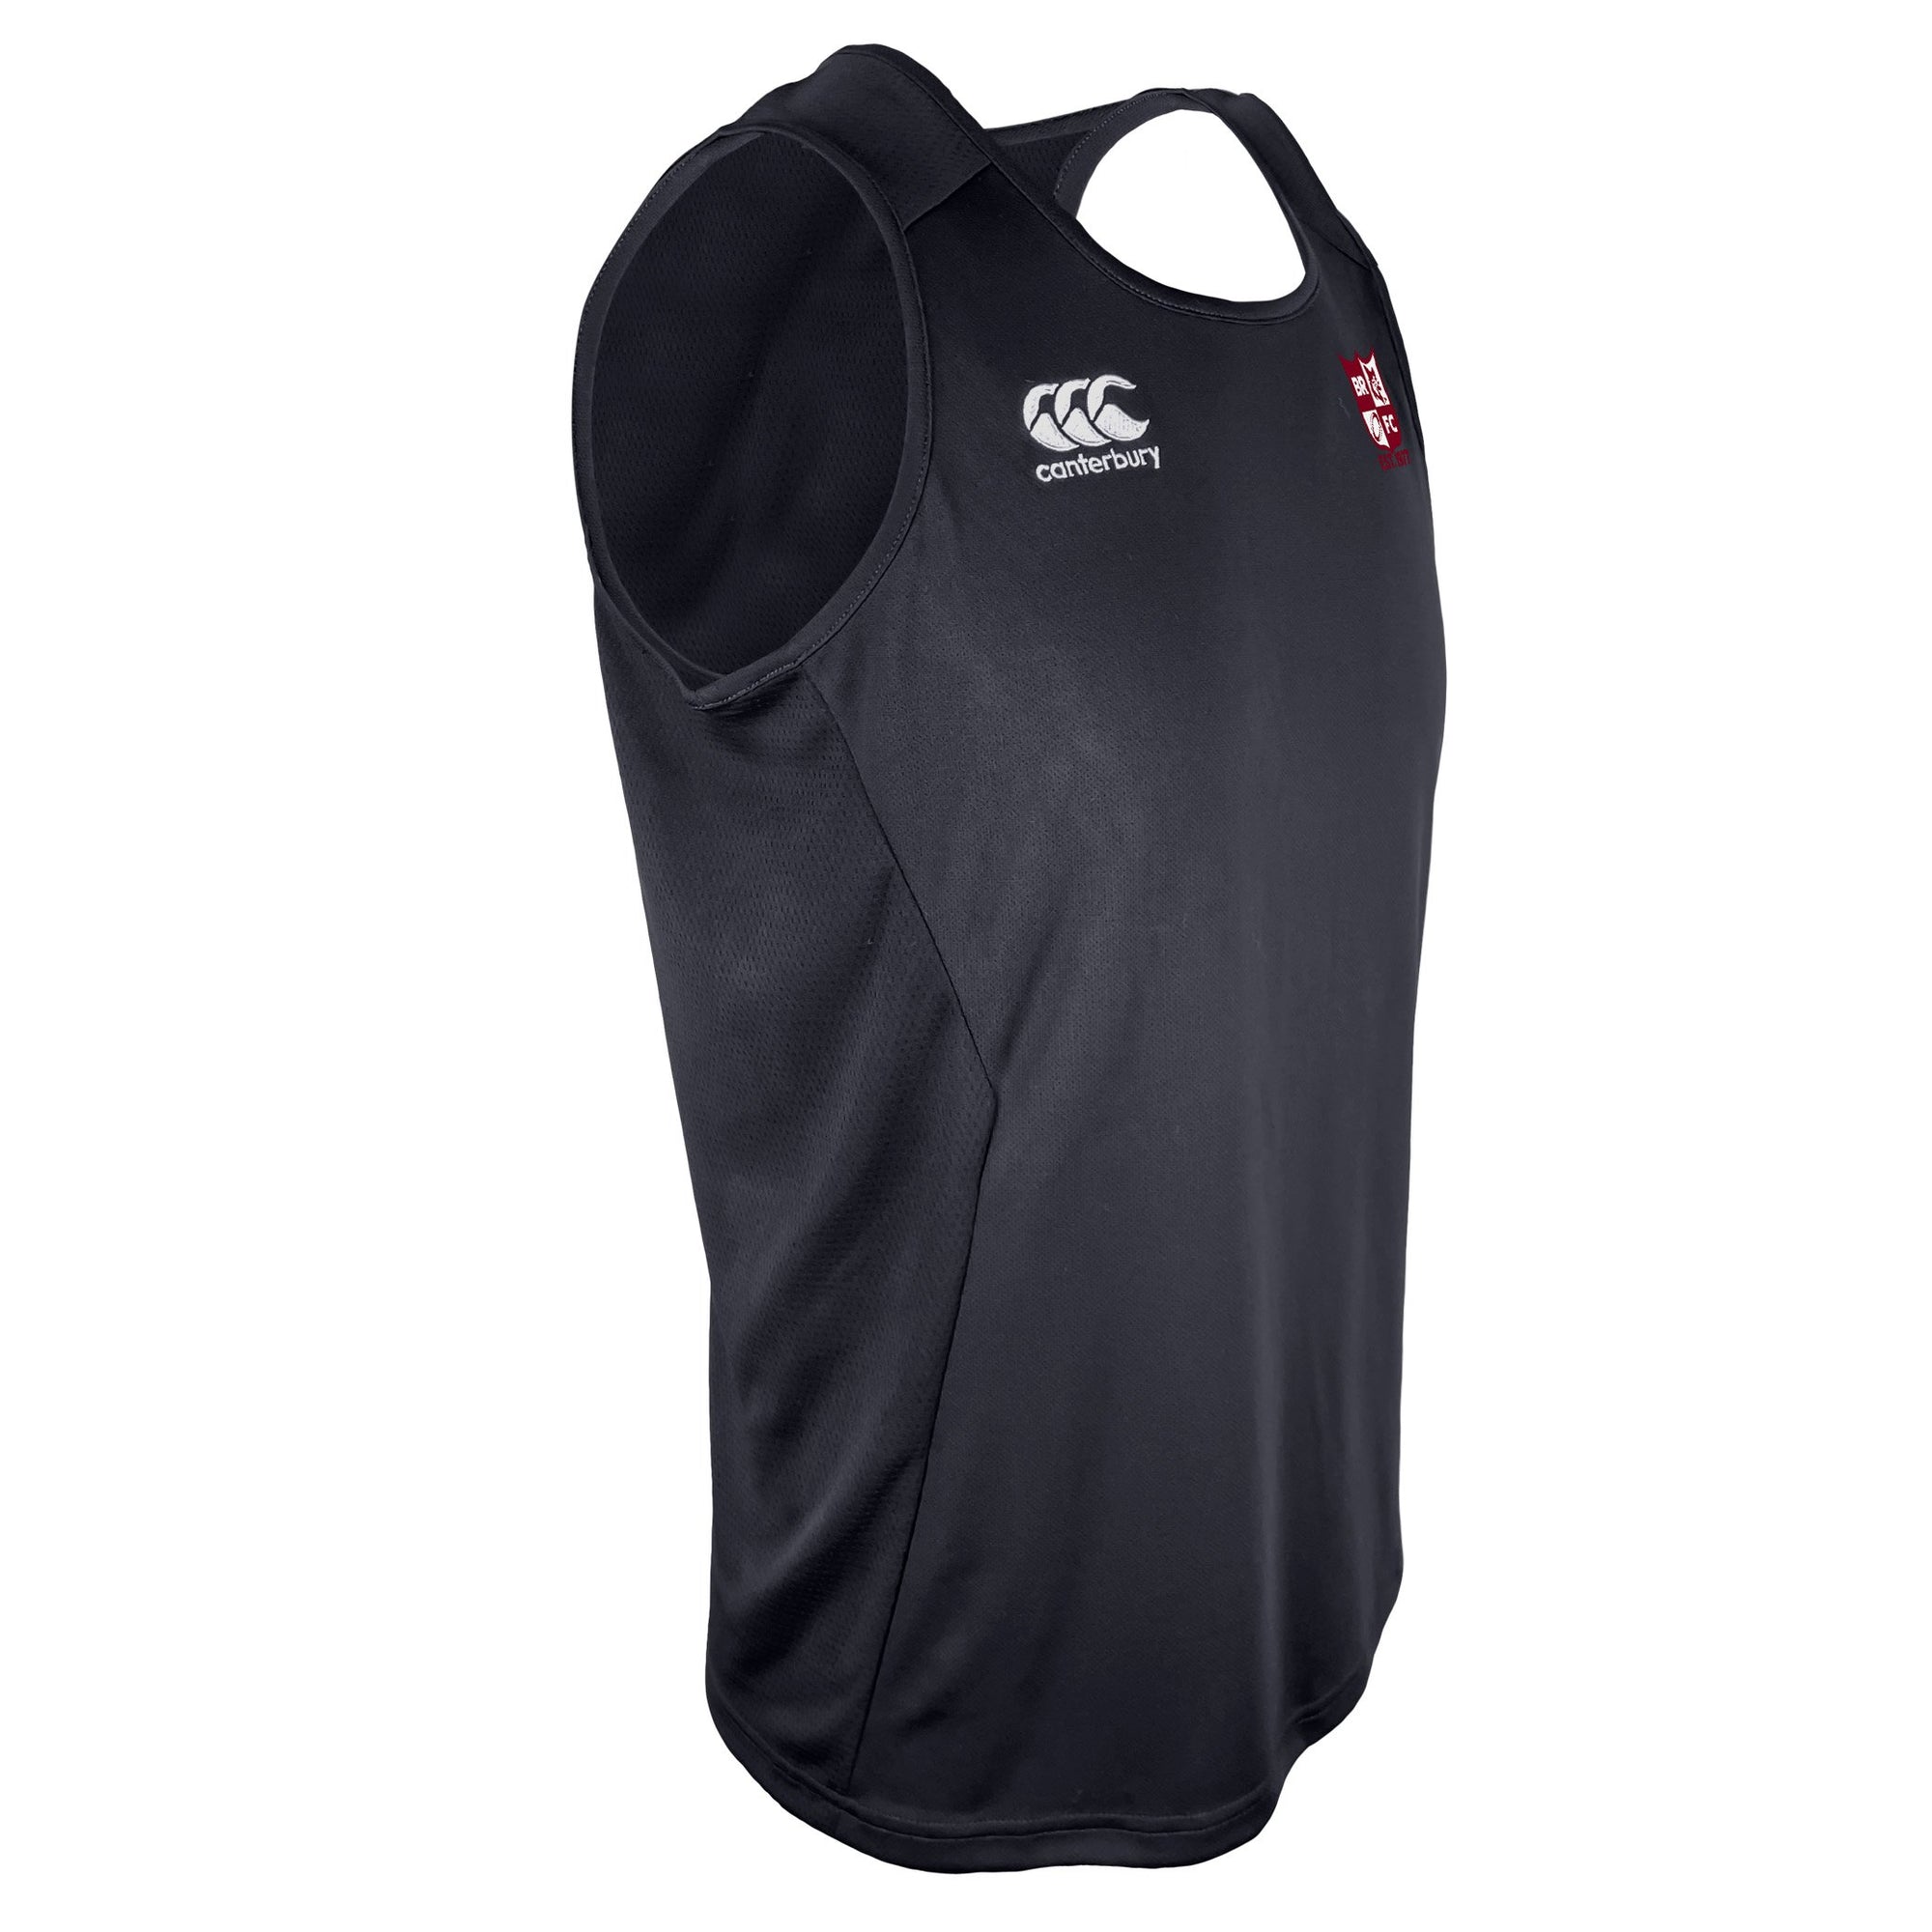 Rugby Imports Bates RFC CCC Singlet